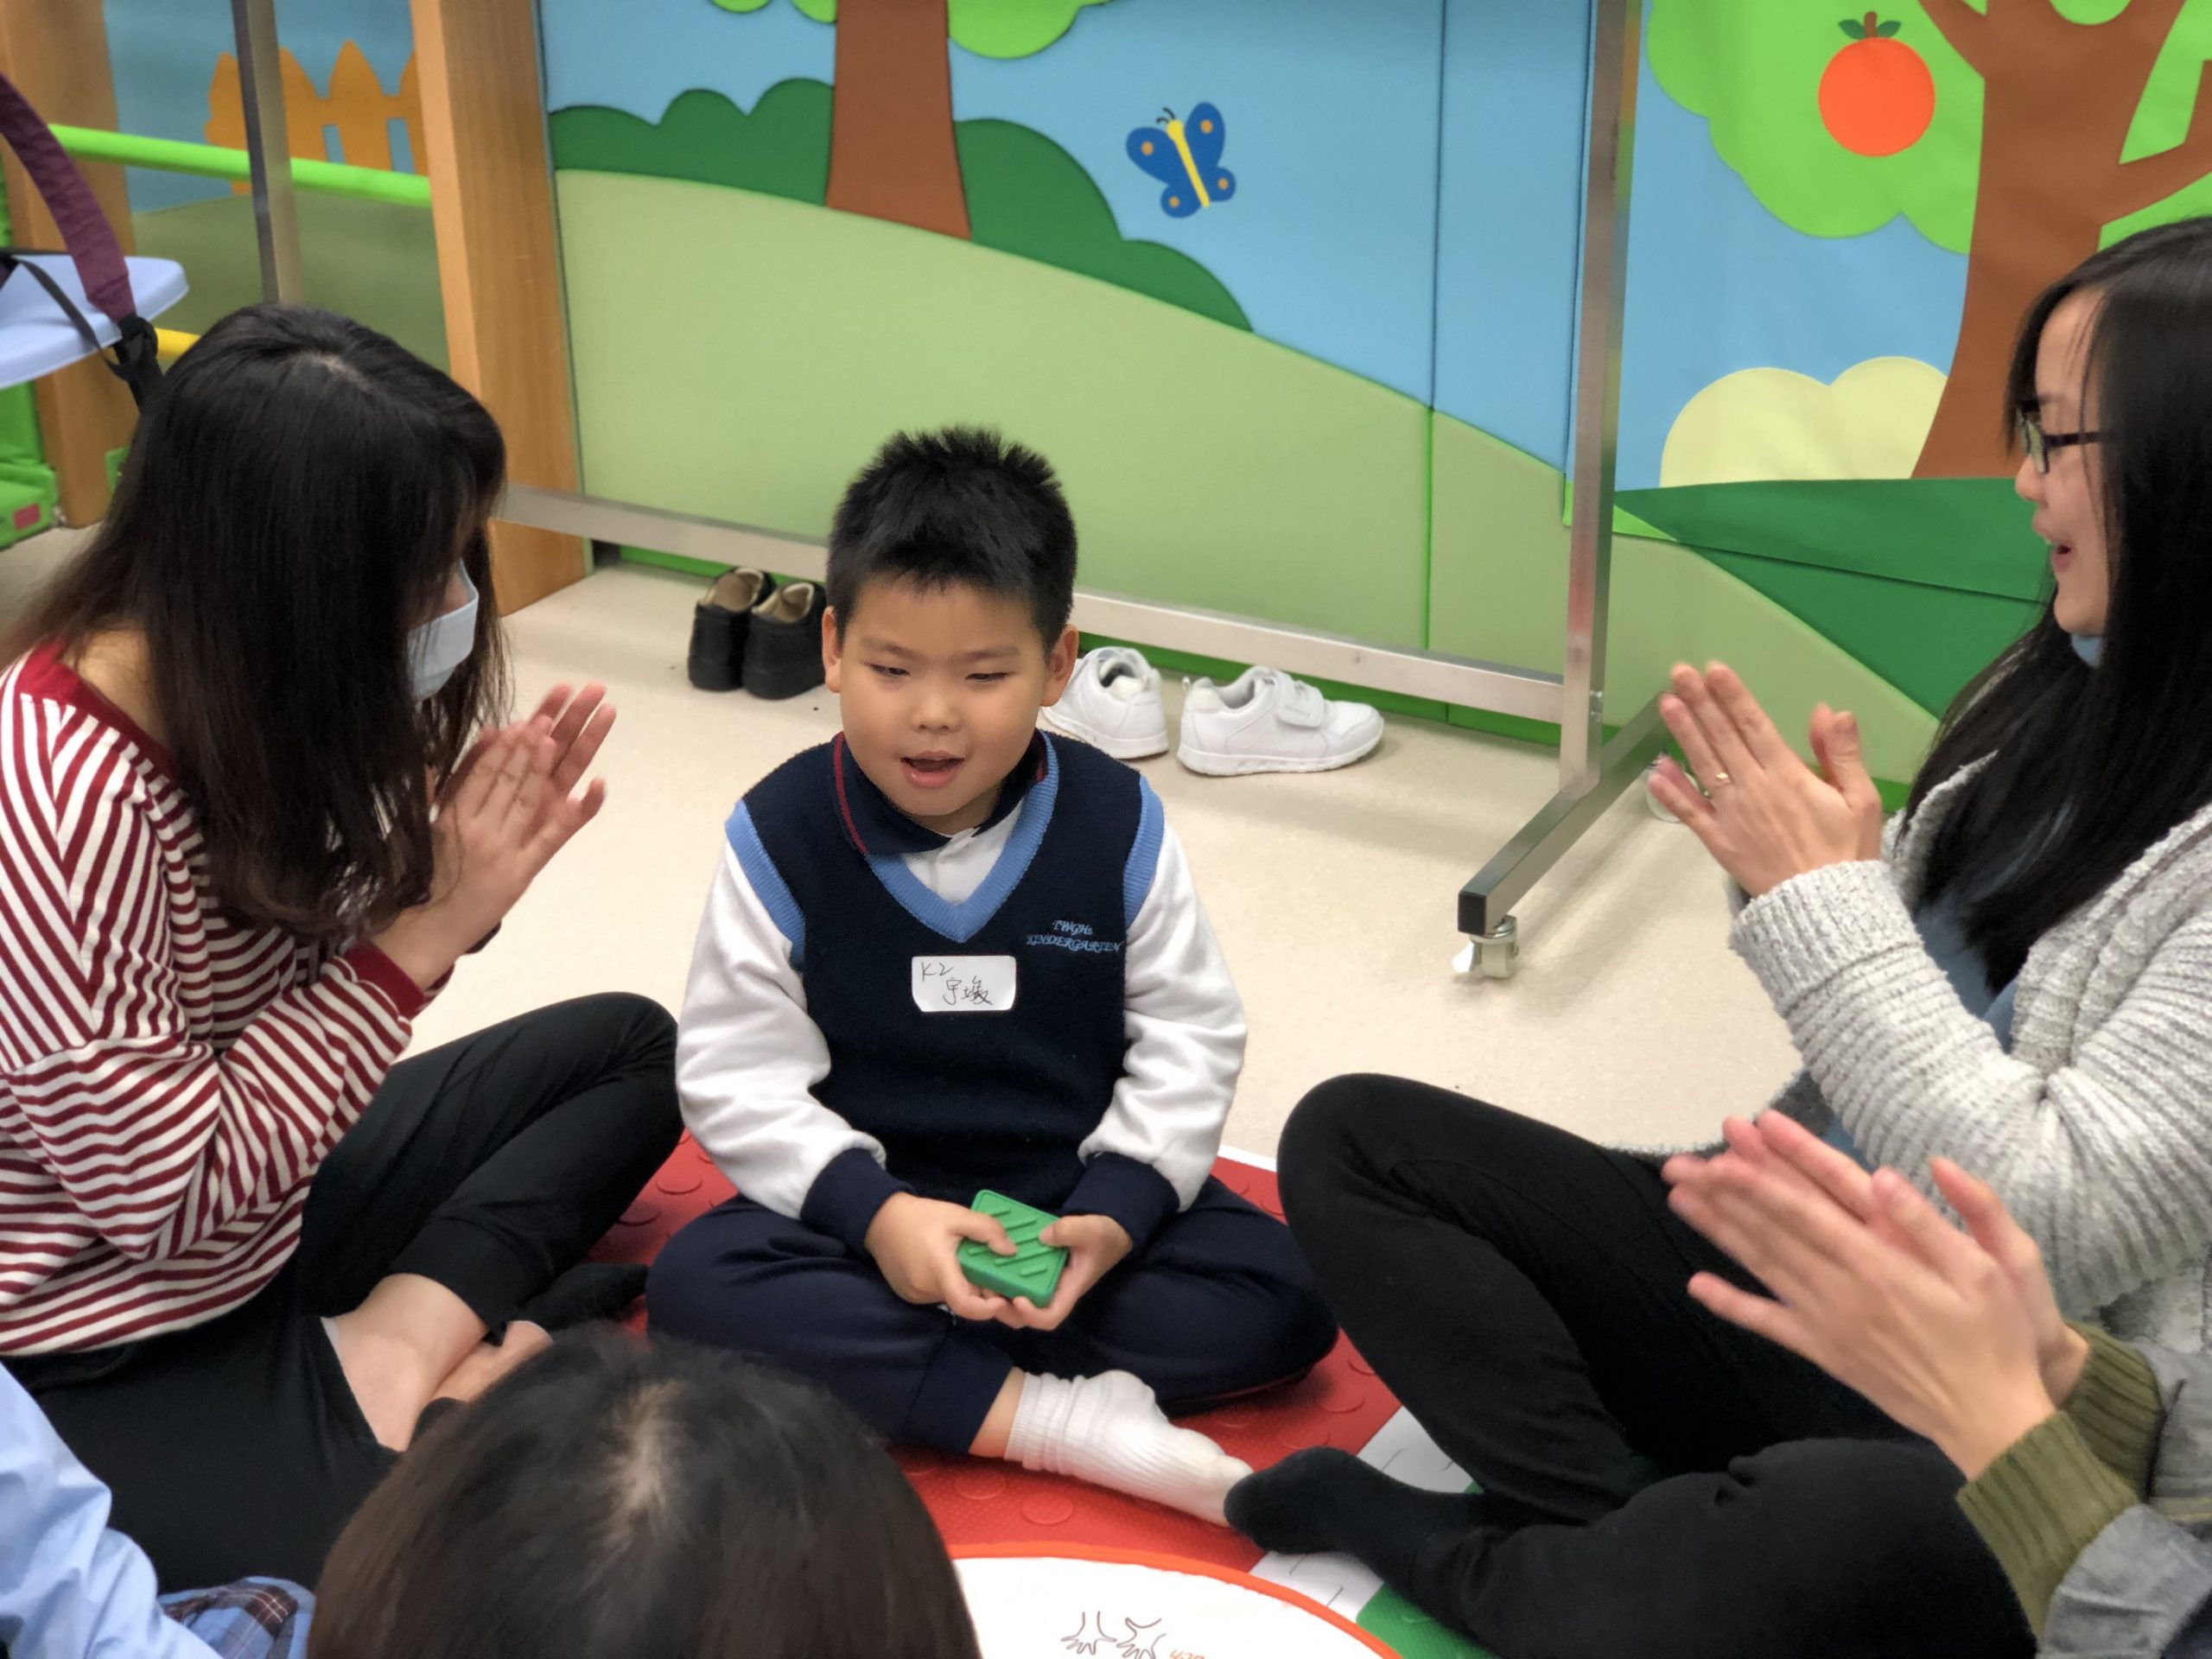 tung wah teachers practice reach and match with children